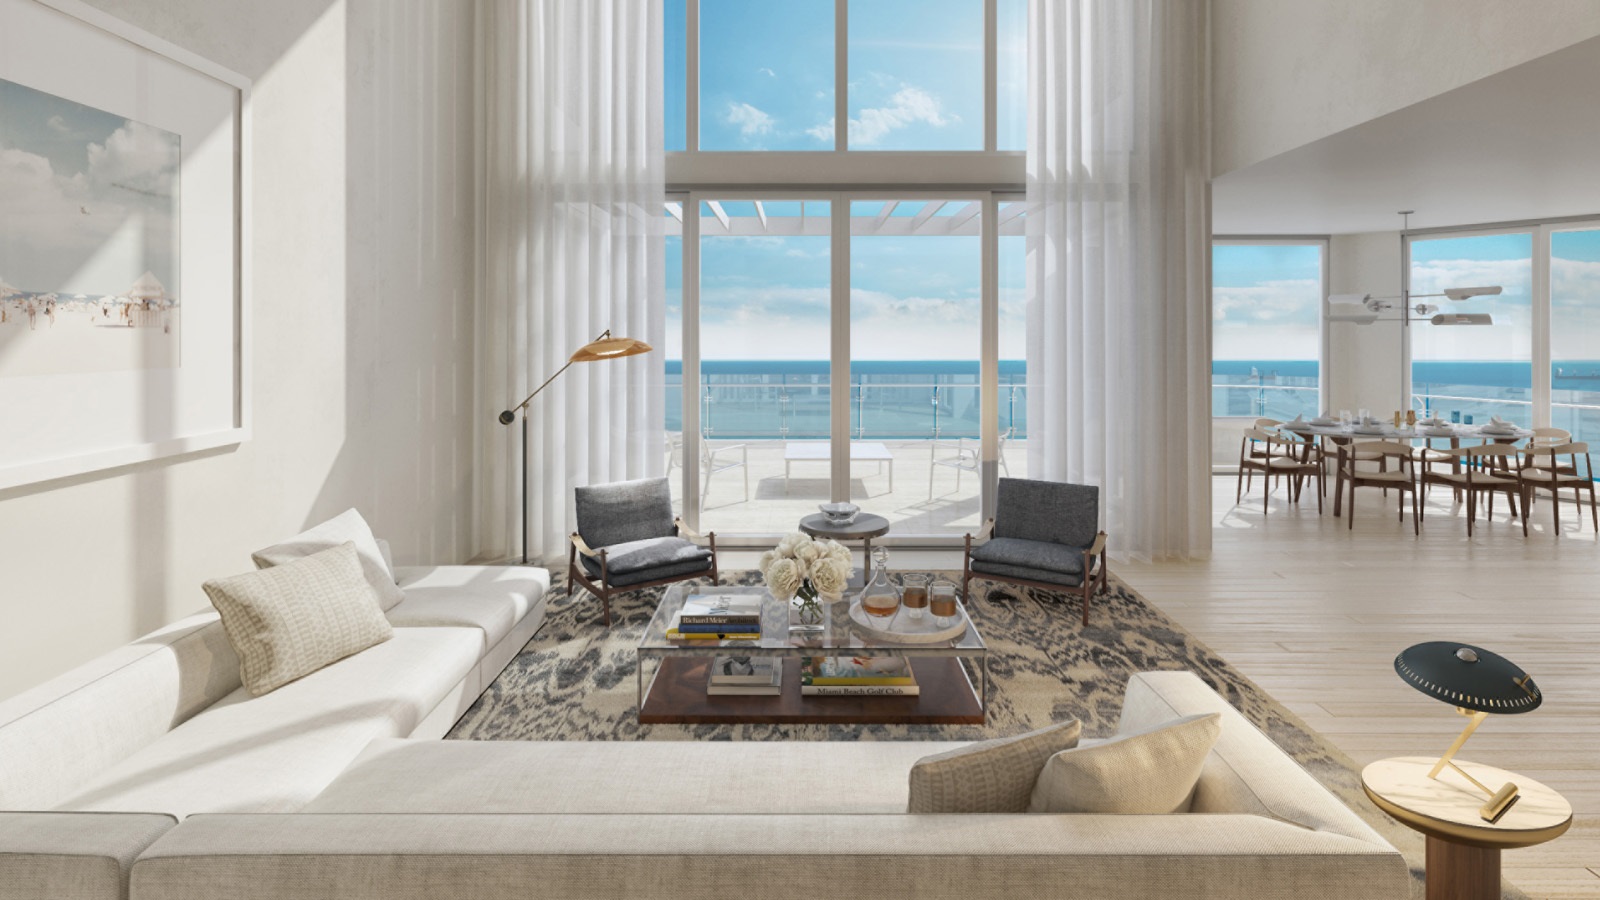 The Four Seasons Hotel and Private Residences Fort Lauderdale will feature 90 private residences and 130 guest rooms.. Click to enlarge.